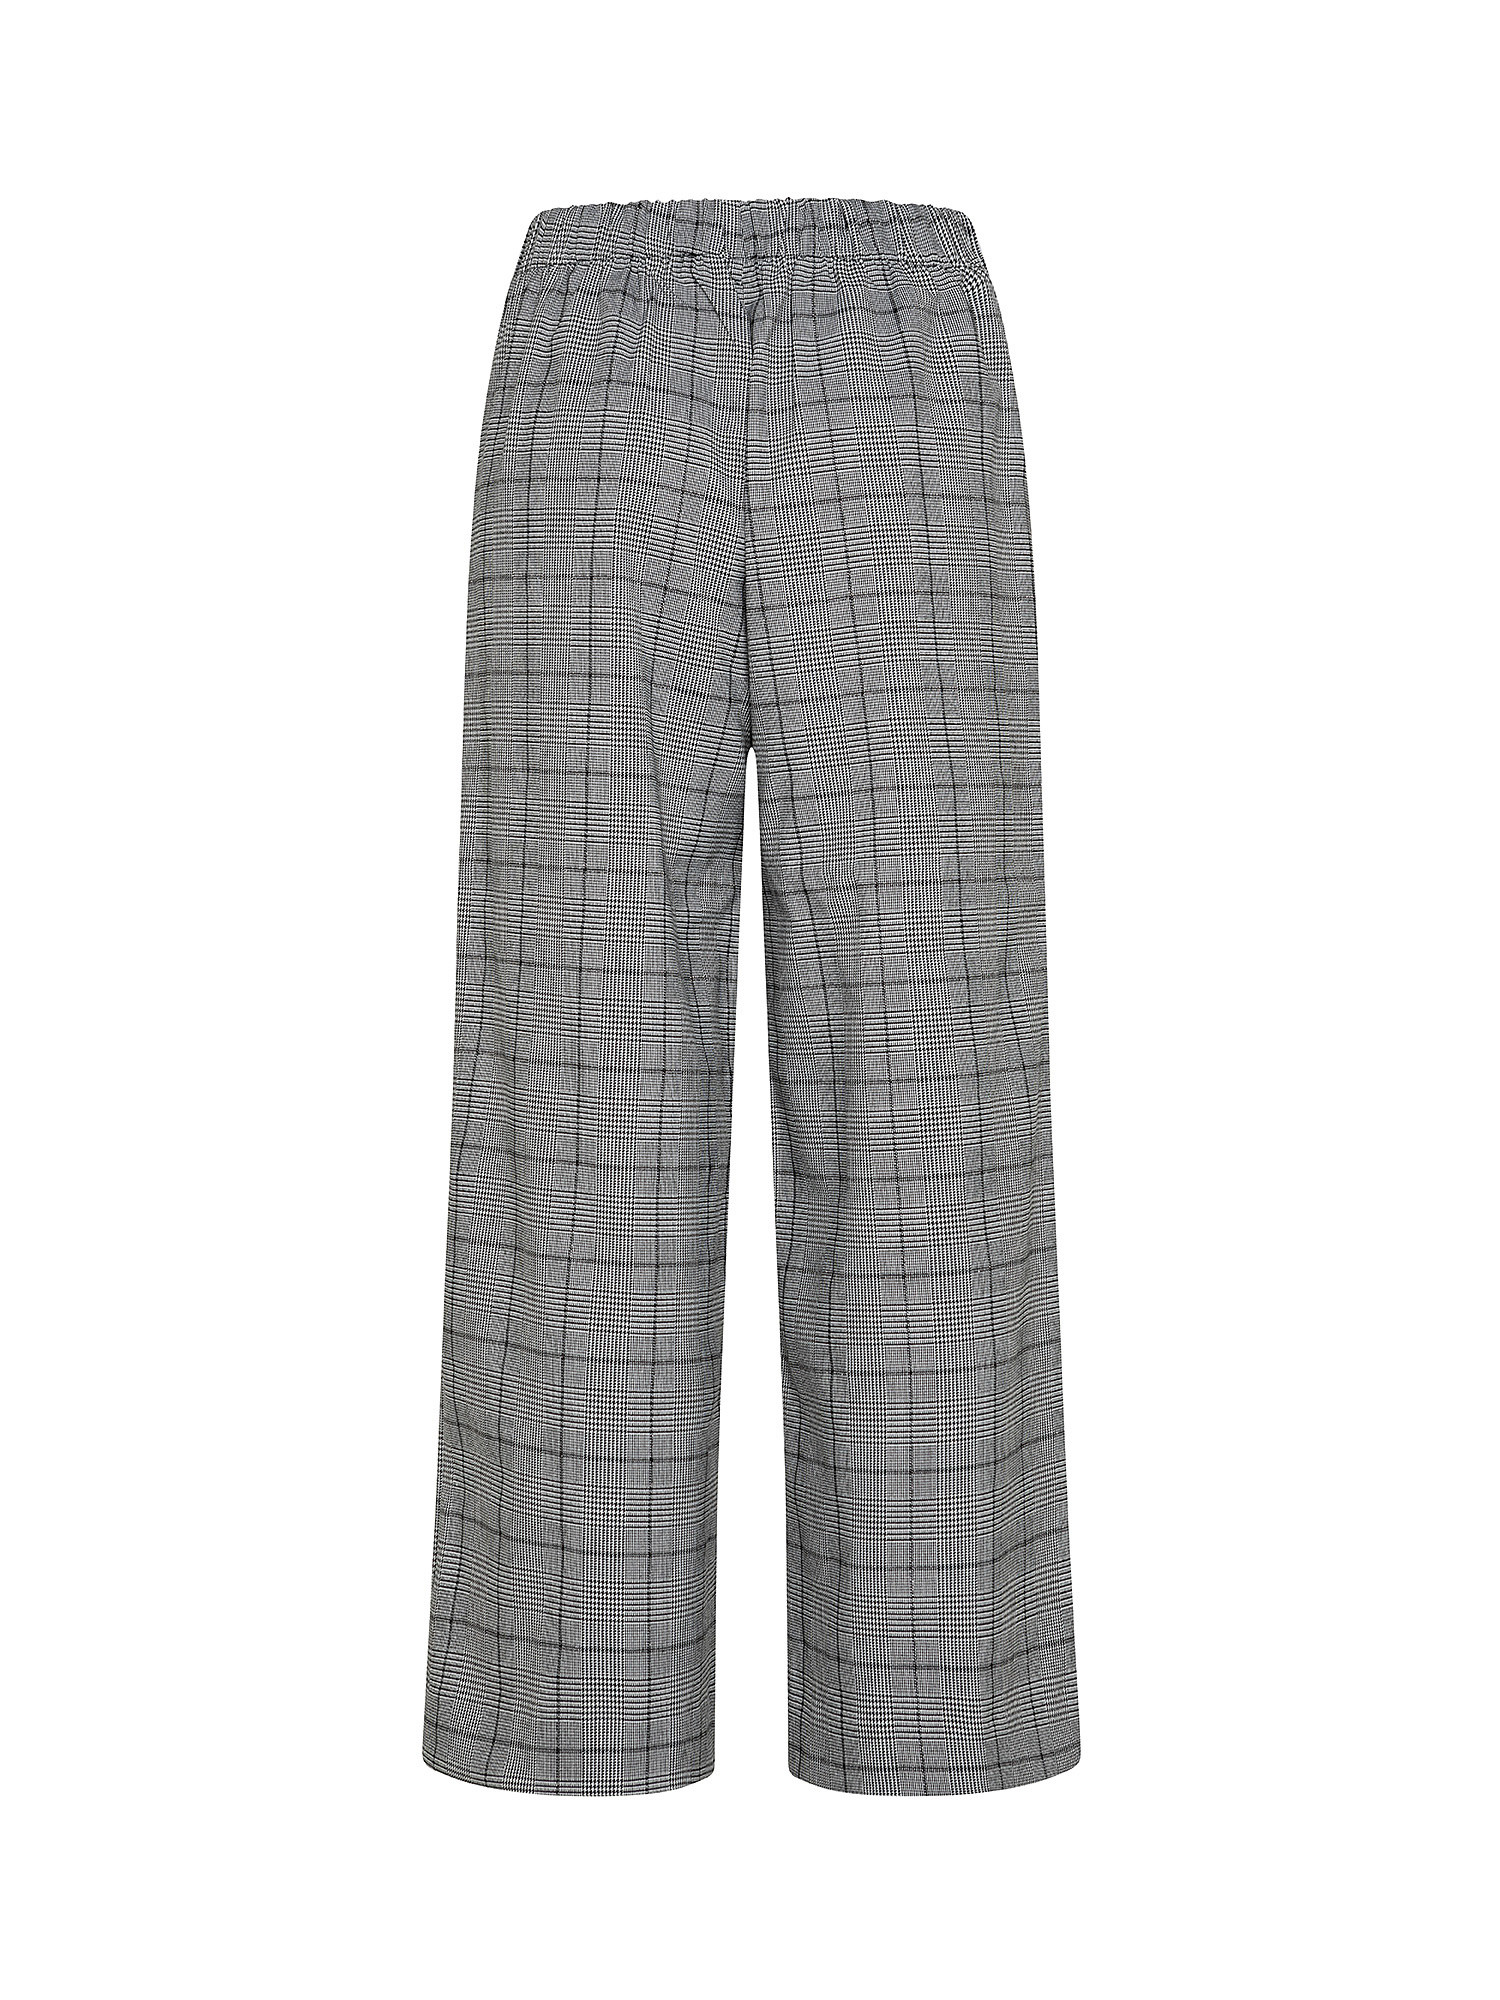 Trousers with checked pattern, Light Grey, large image number 1